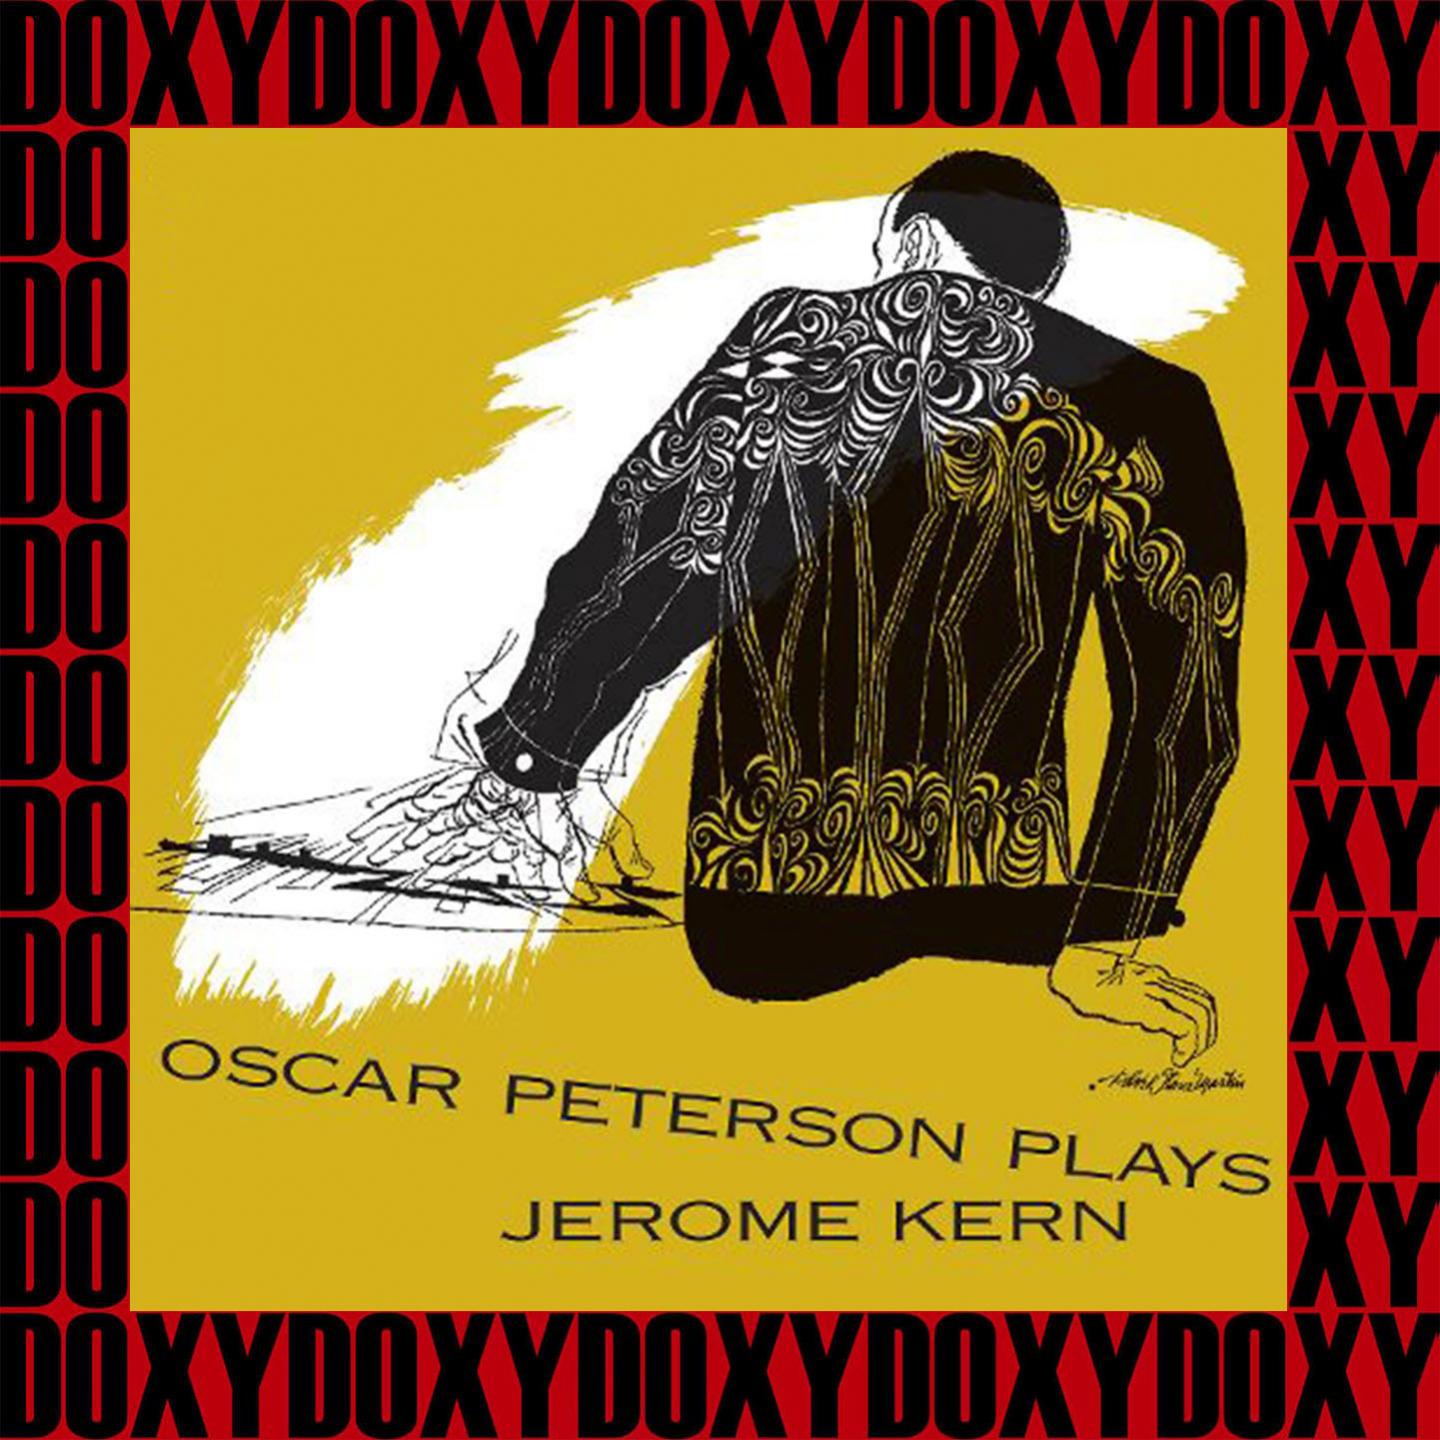 Plays Jerome Kern (Remastered Version) (Doxy Collection)